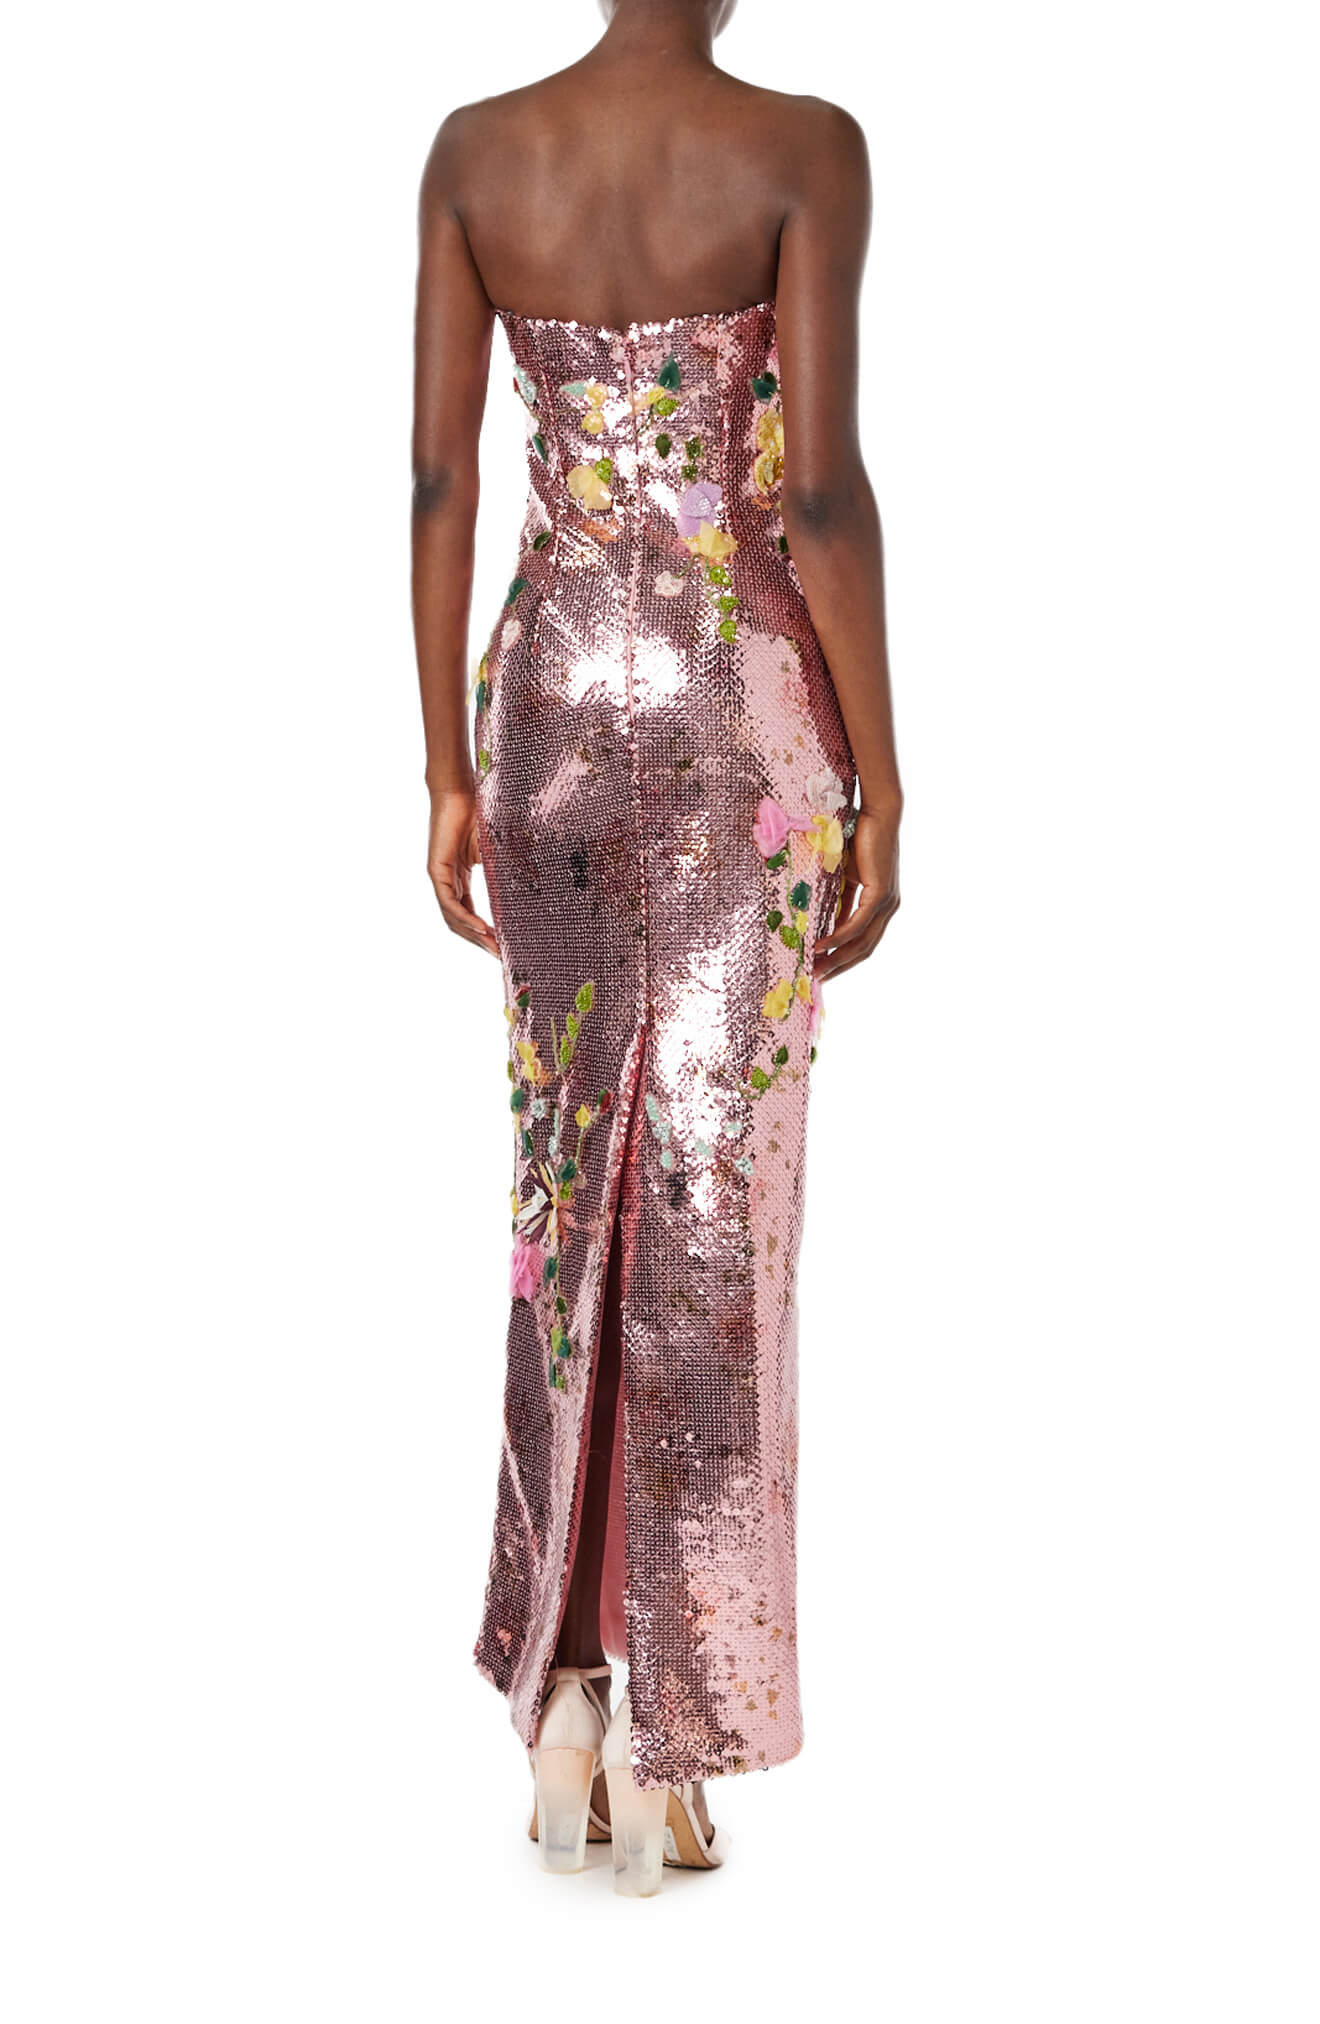 Monique Lhuillier Spring 2024 strapless column gown in cerise colored sequins and floral embroidery - back.